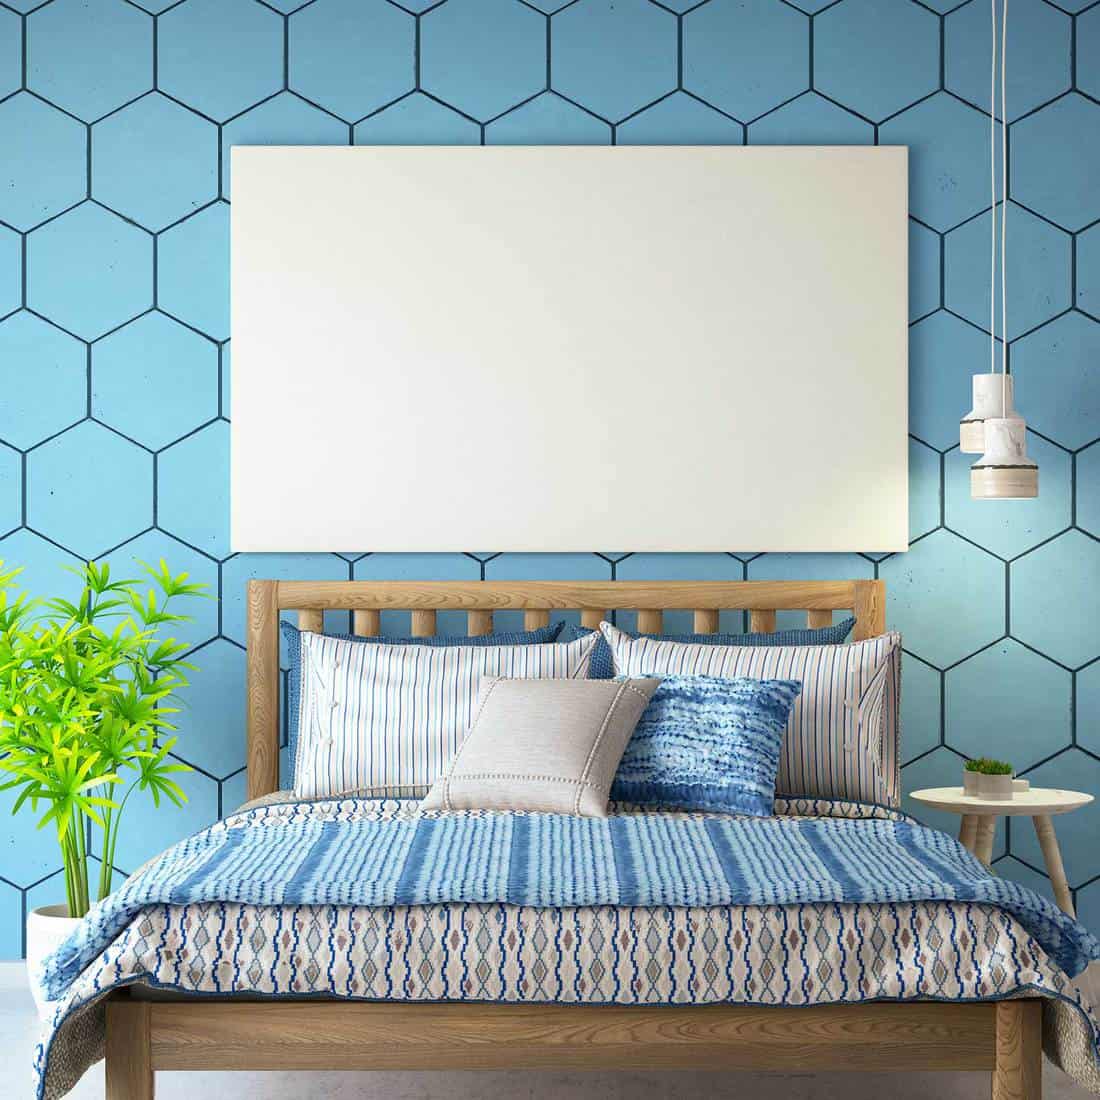 Light blue bedroom with wooden bed, patterned walls and empty frame